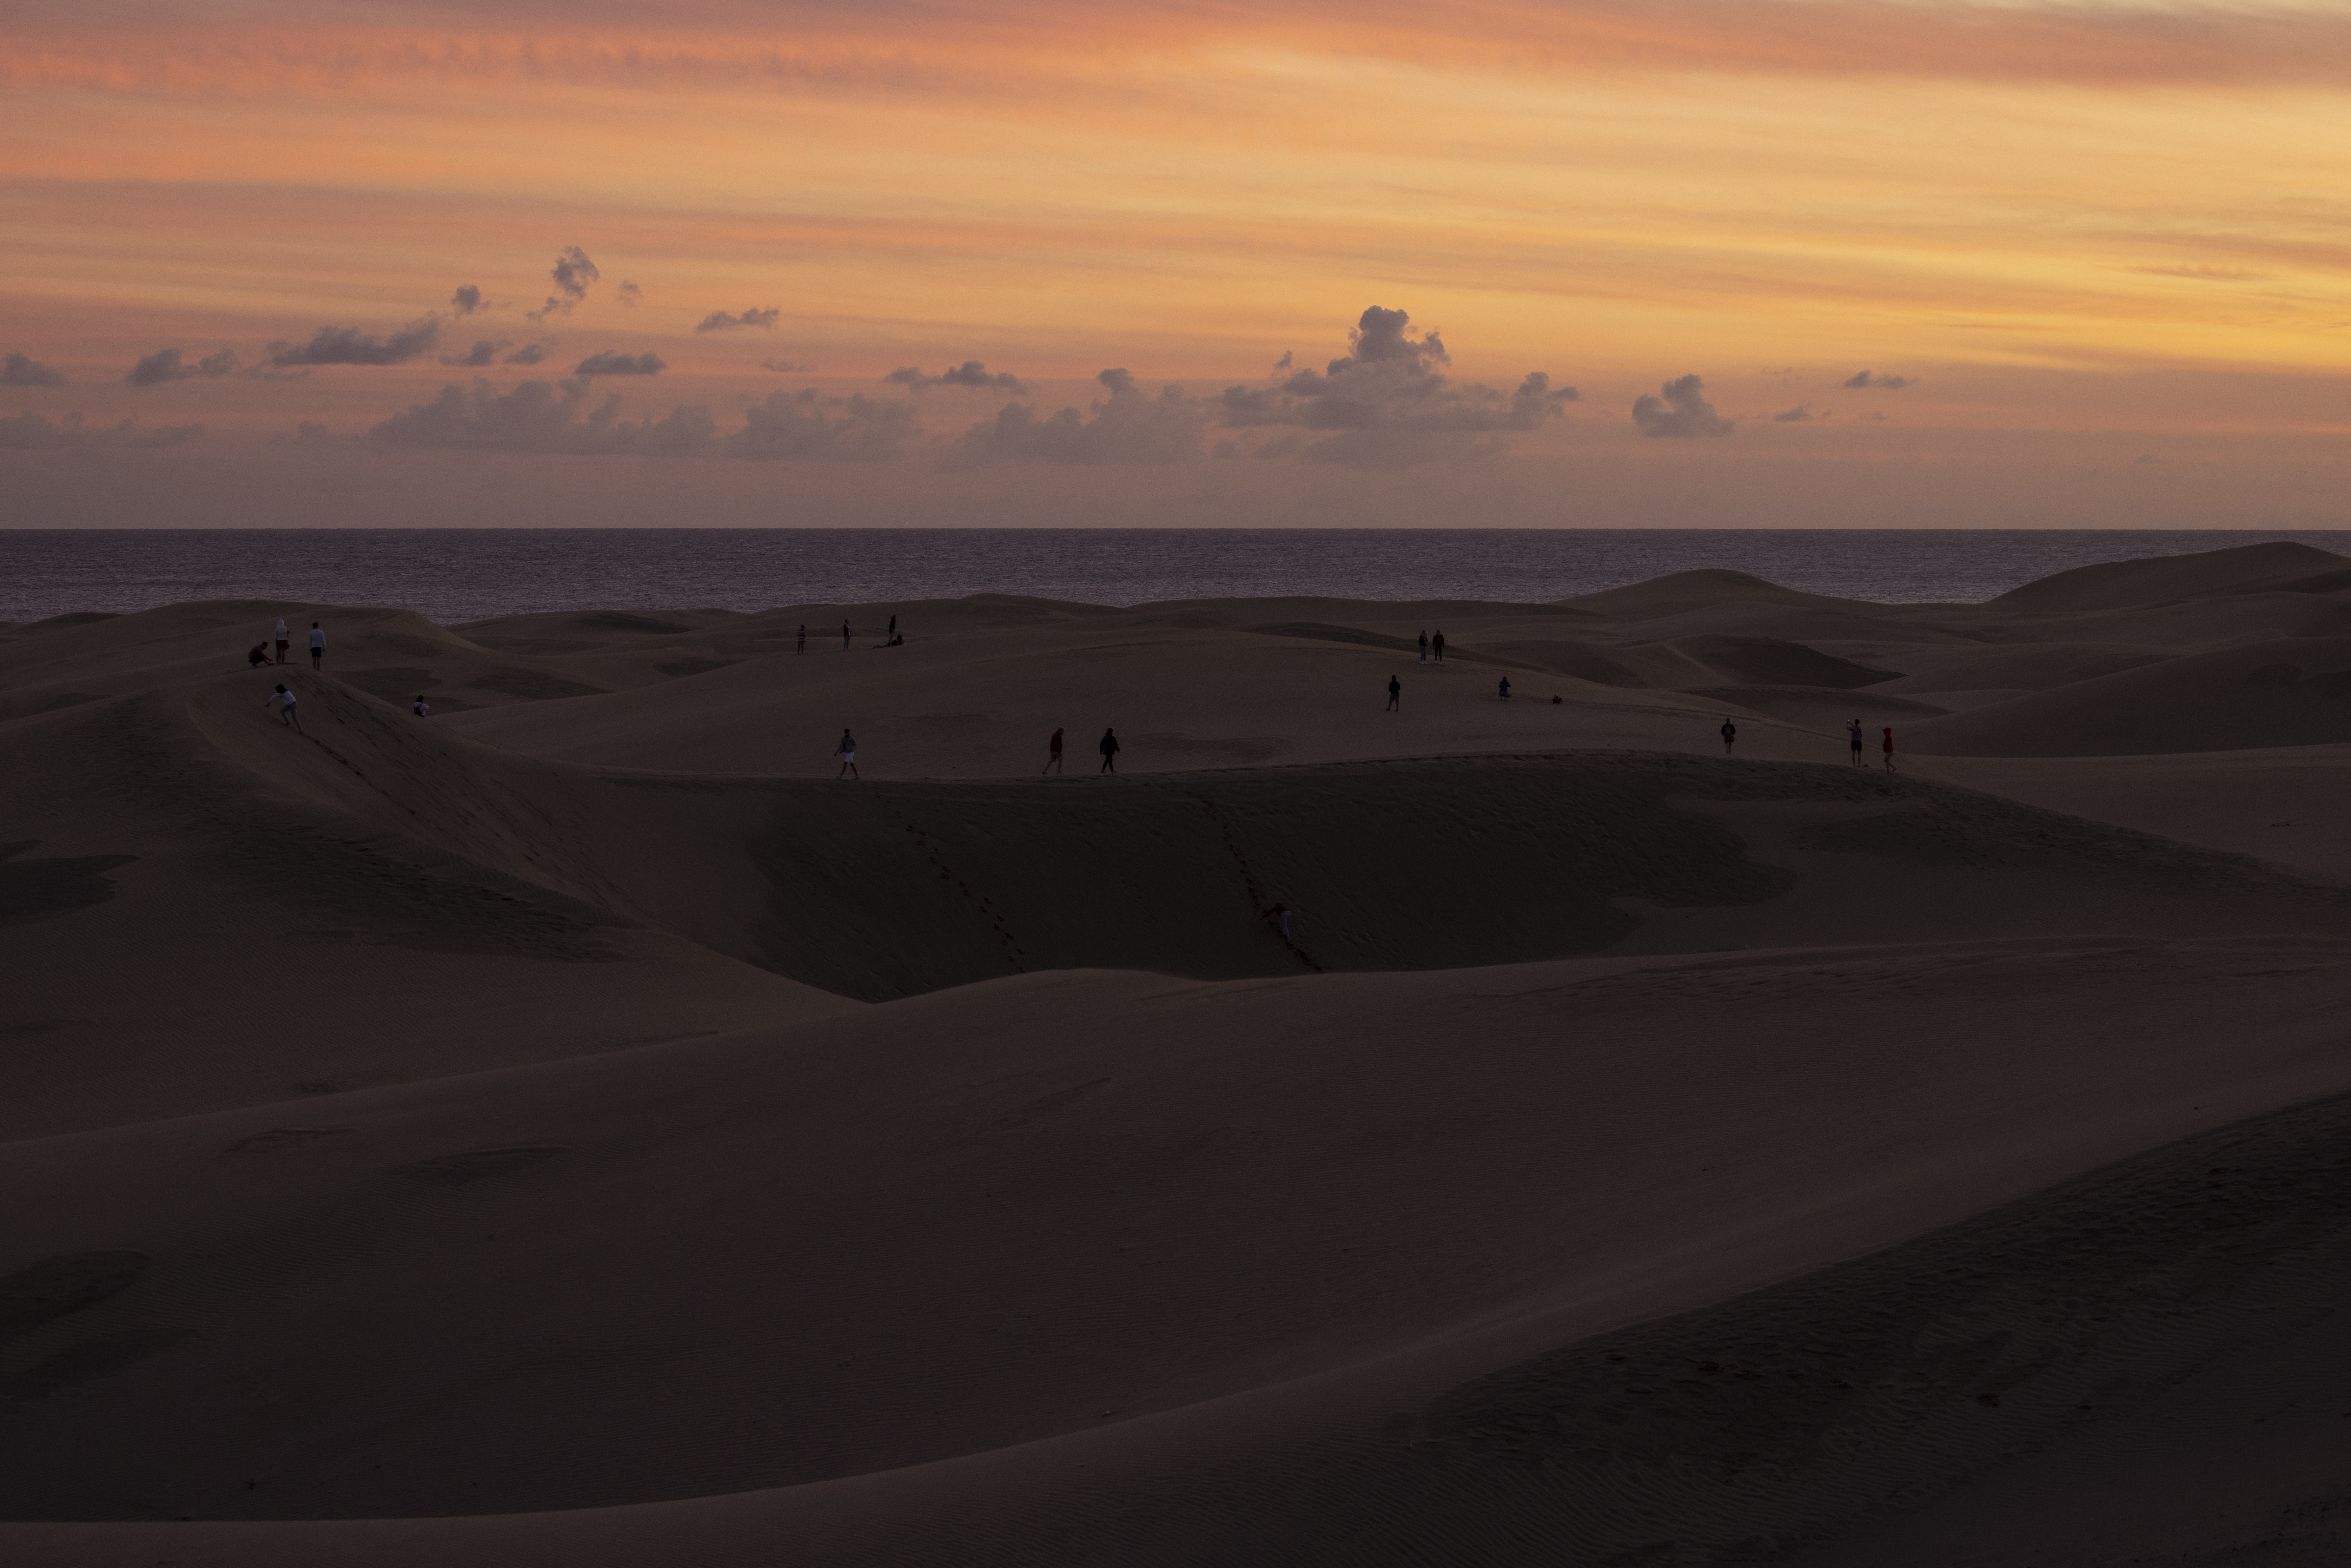 People walk through the sand dunes at sunset on December 7, 2020, in Maspalomas, Spain. | Source: Getty Images